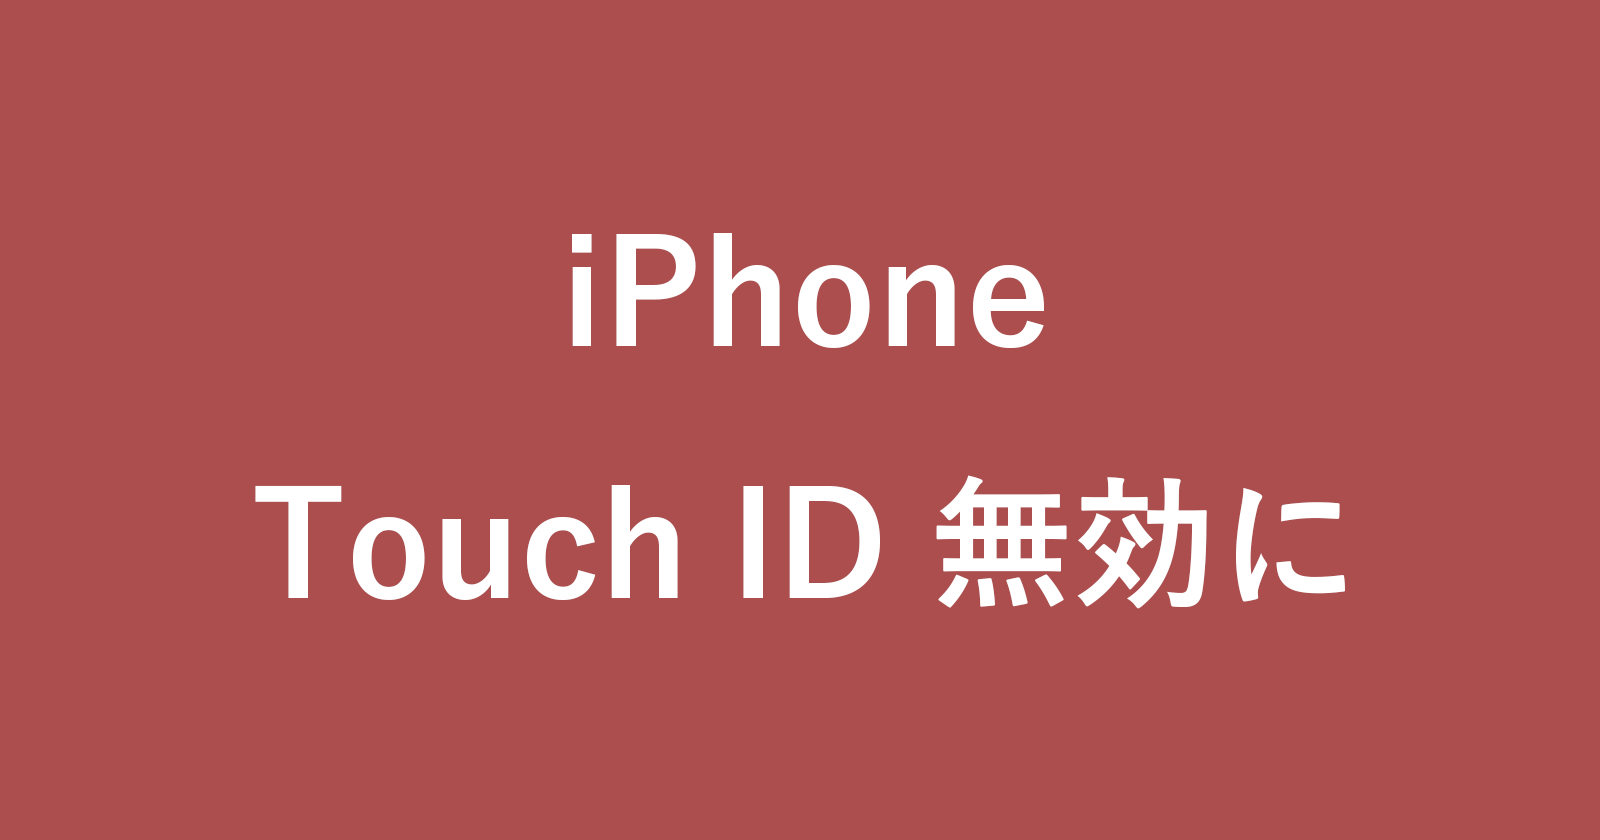 iphone remove touch id fingerprint